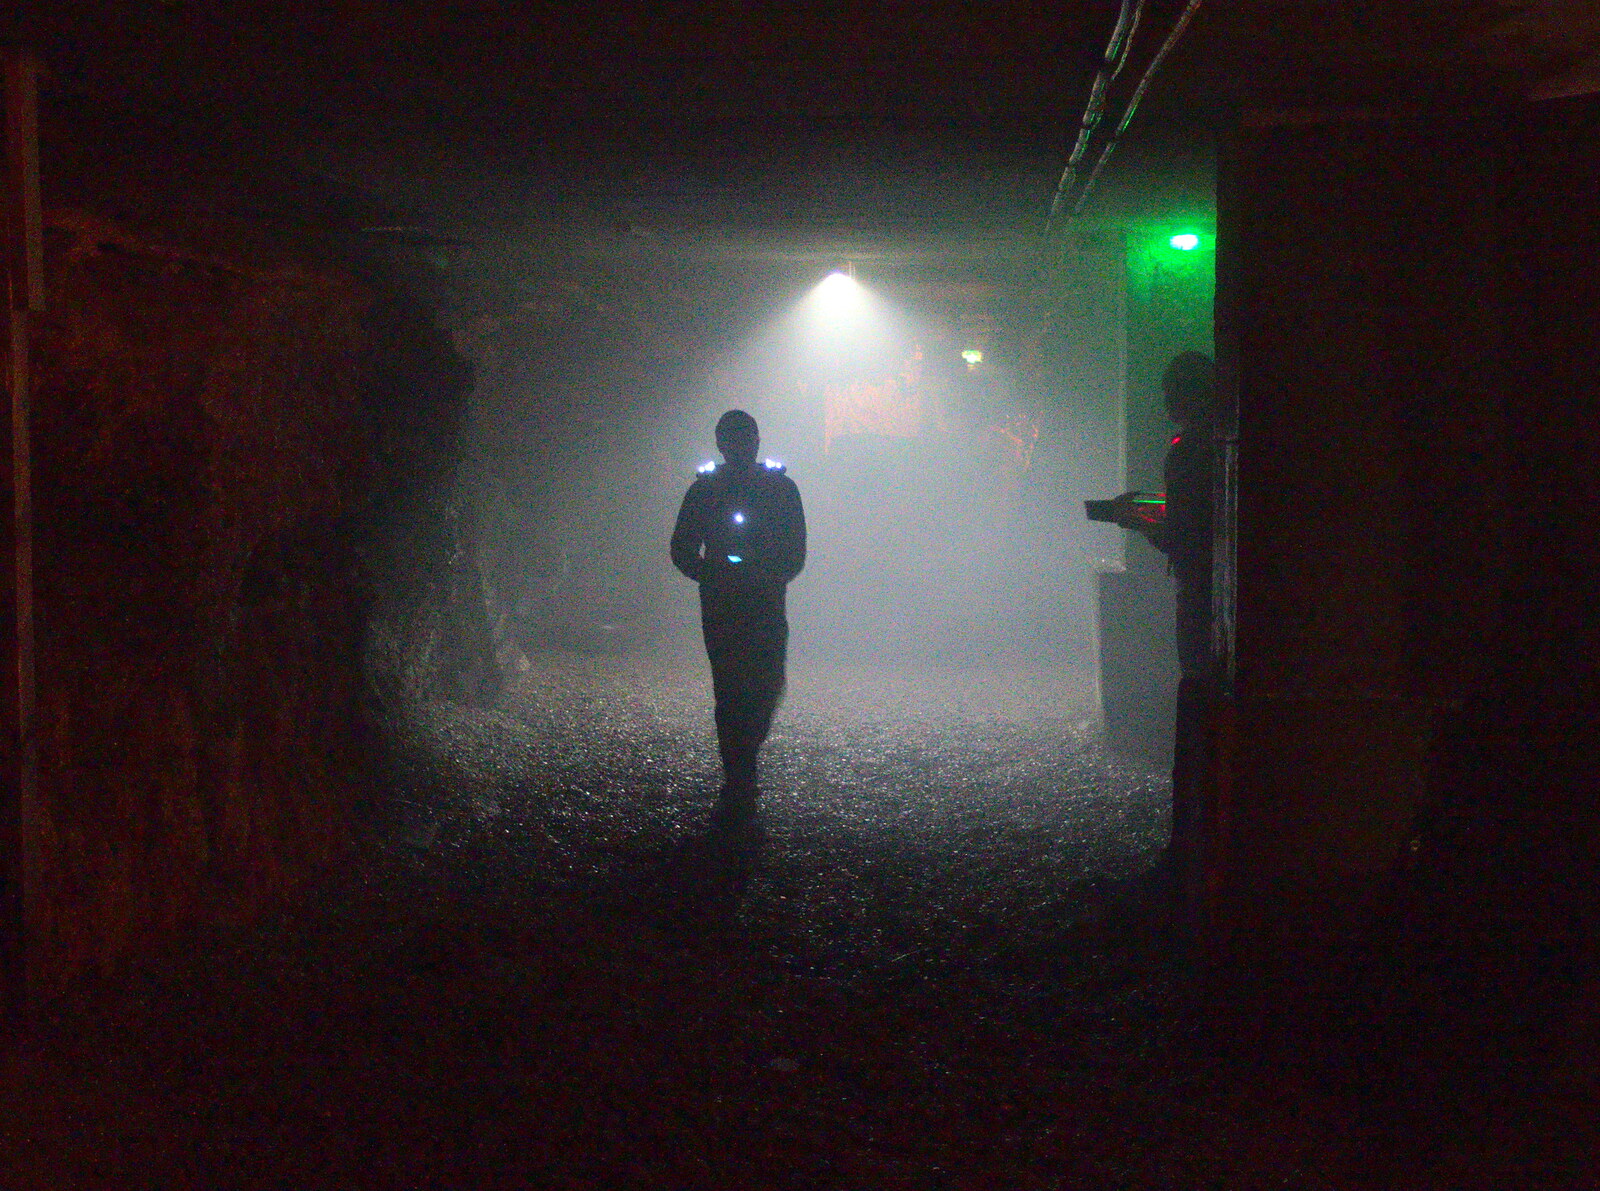 SwiftKey Does Laser Tag, Charlton and Greenwich, London - 29th November 2016: Someone roams around in the fog